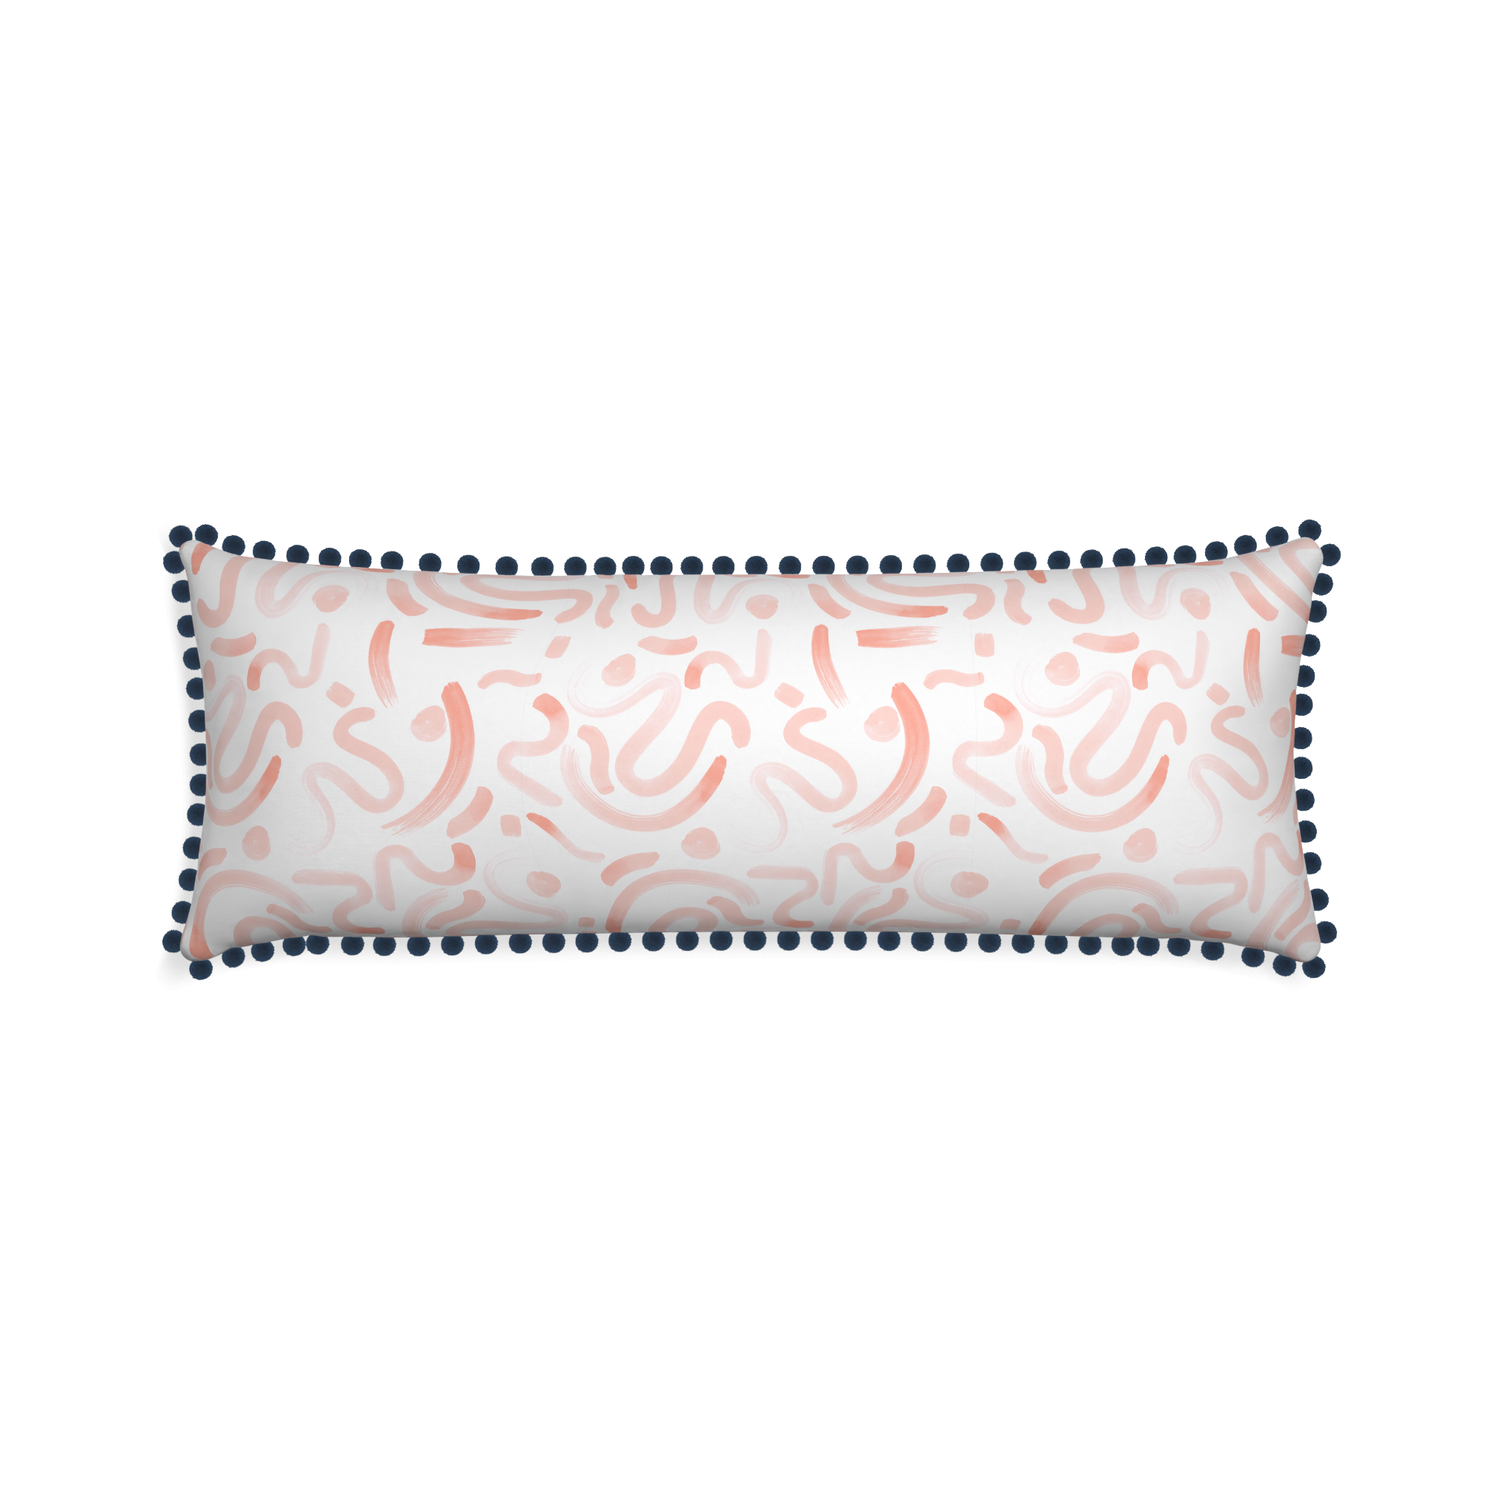 Xl-lumbar hockney pink custom pink graphicpillow with c on white background